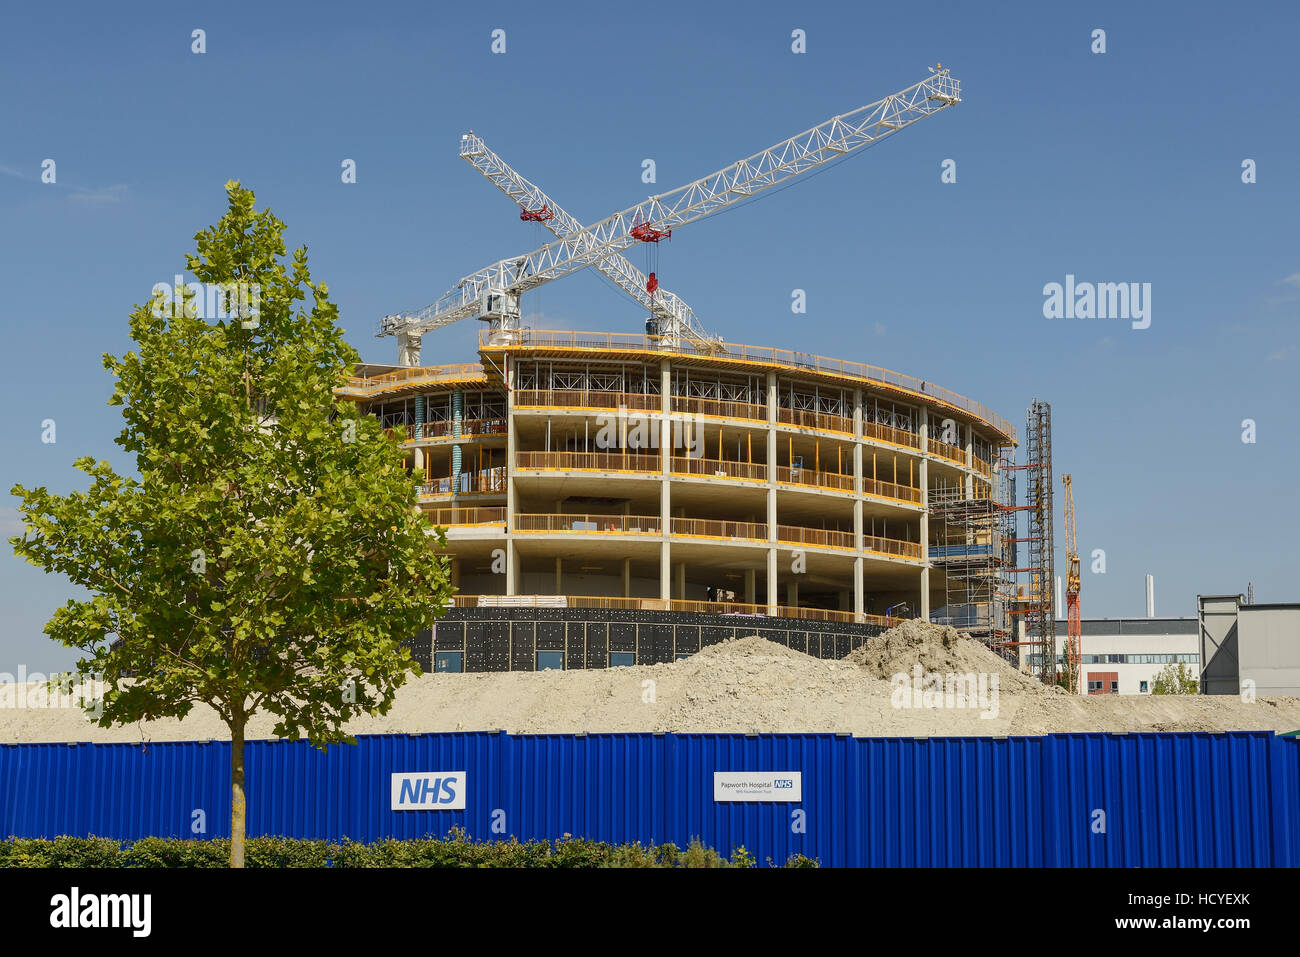 Construction of the new NHS Papworth hospital on the outskirts of Cambridge UK Stock Photo